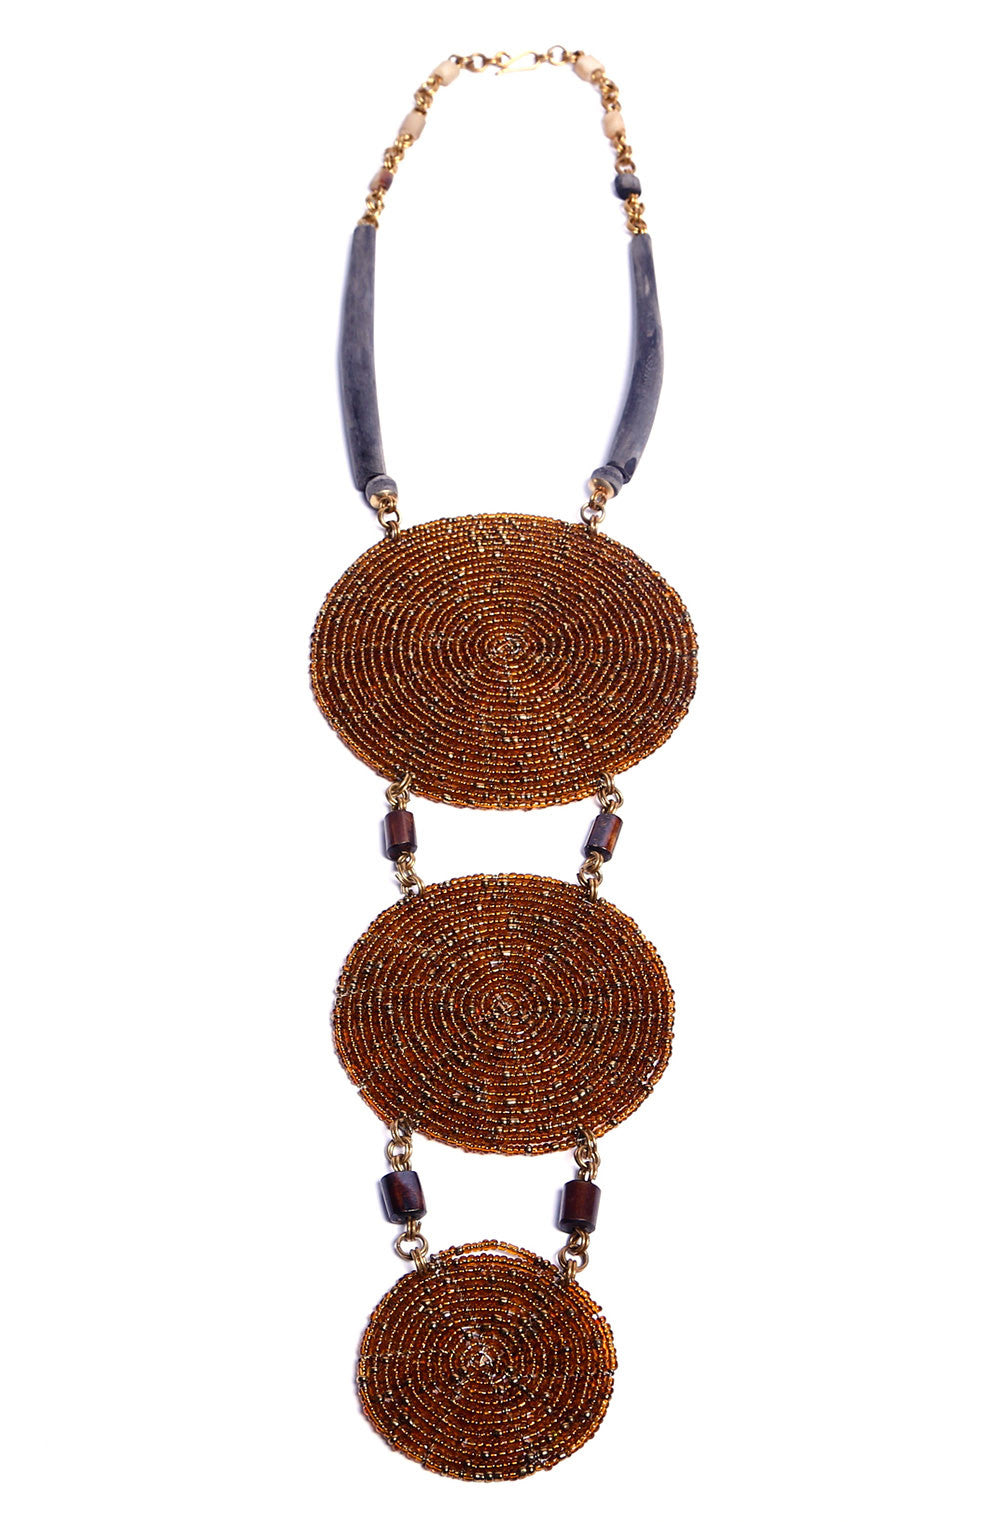 This stunning one-of-a-kind necklace features hundreds of brown glass beads each individually placed by hand, giving it a bold and striking design. Get lots of compliments on this unique and bold statement necklace.